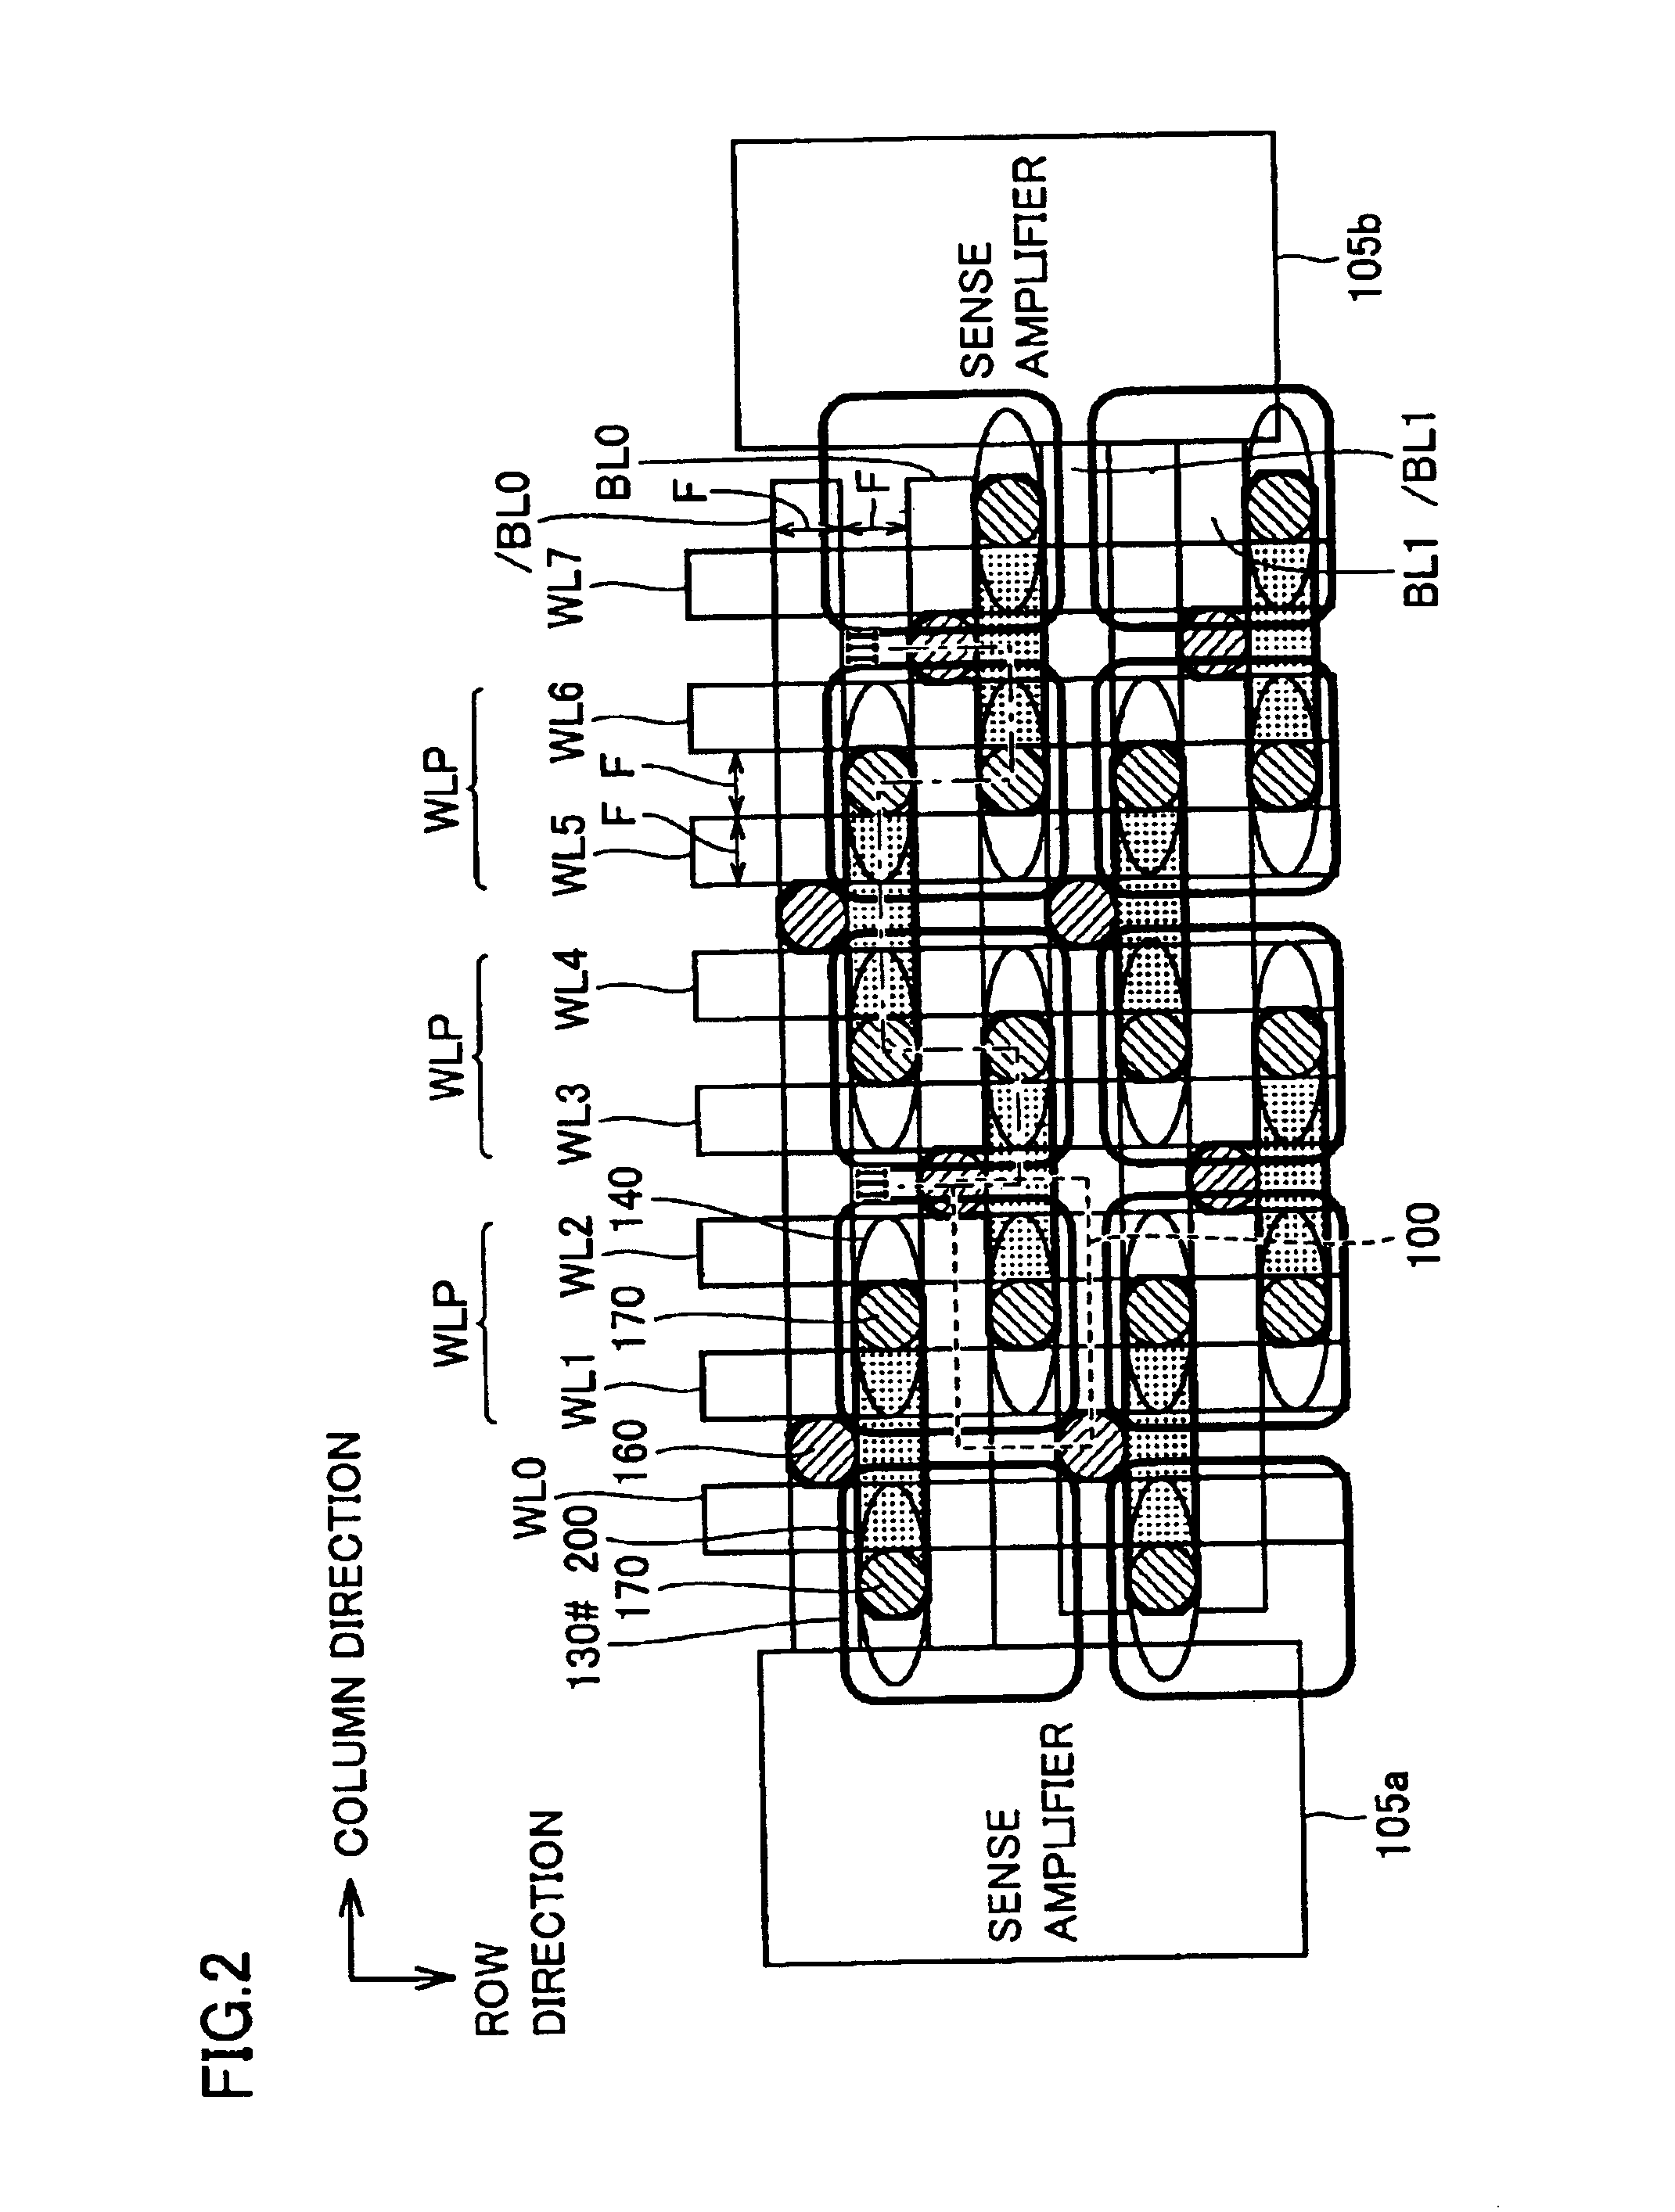 Semiconductor memory device having twin-cell units